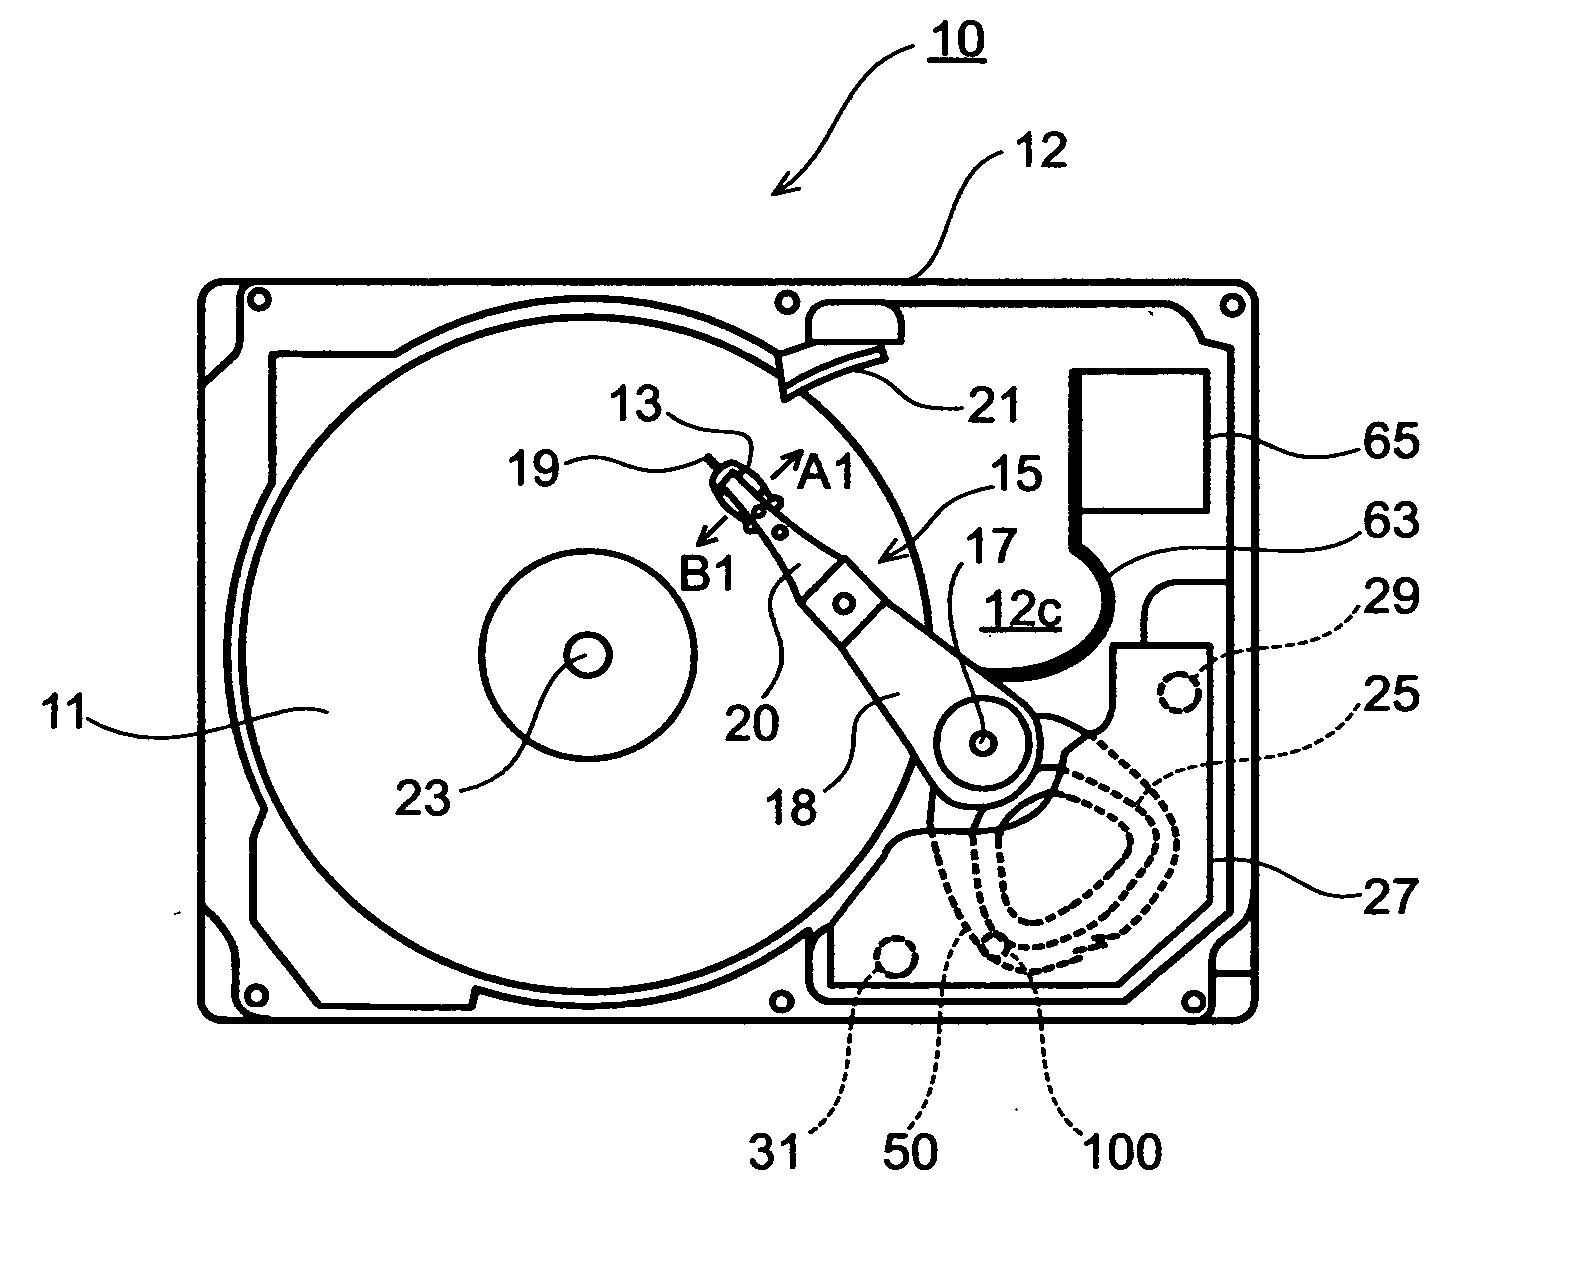 Rotating disk storage device